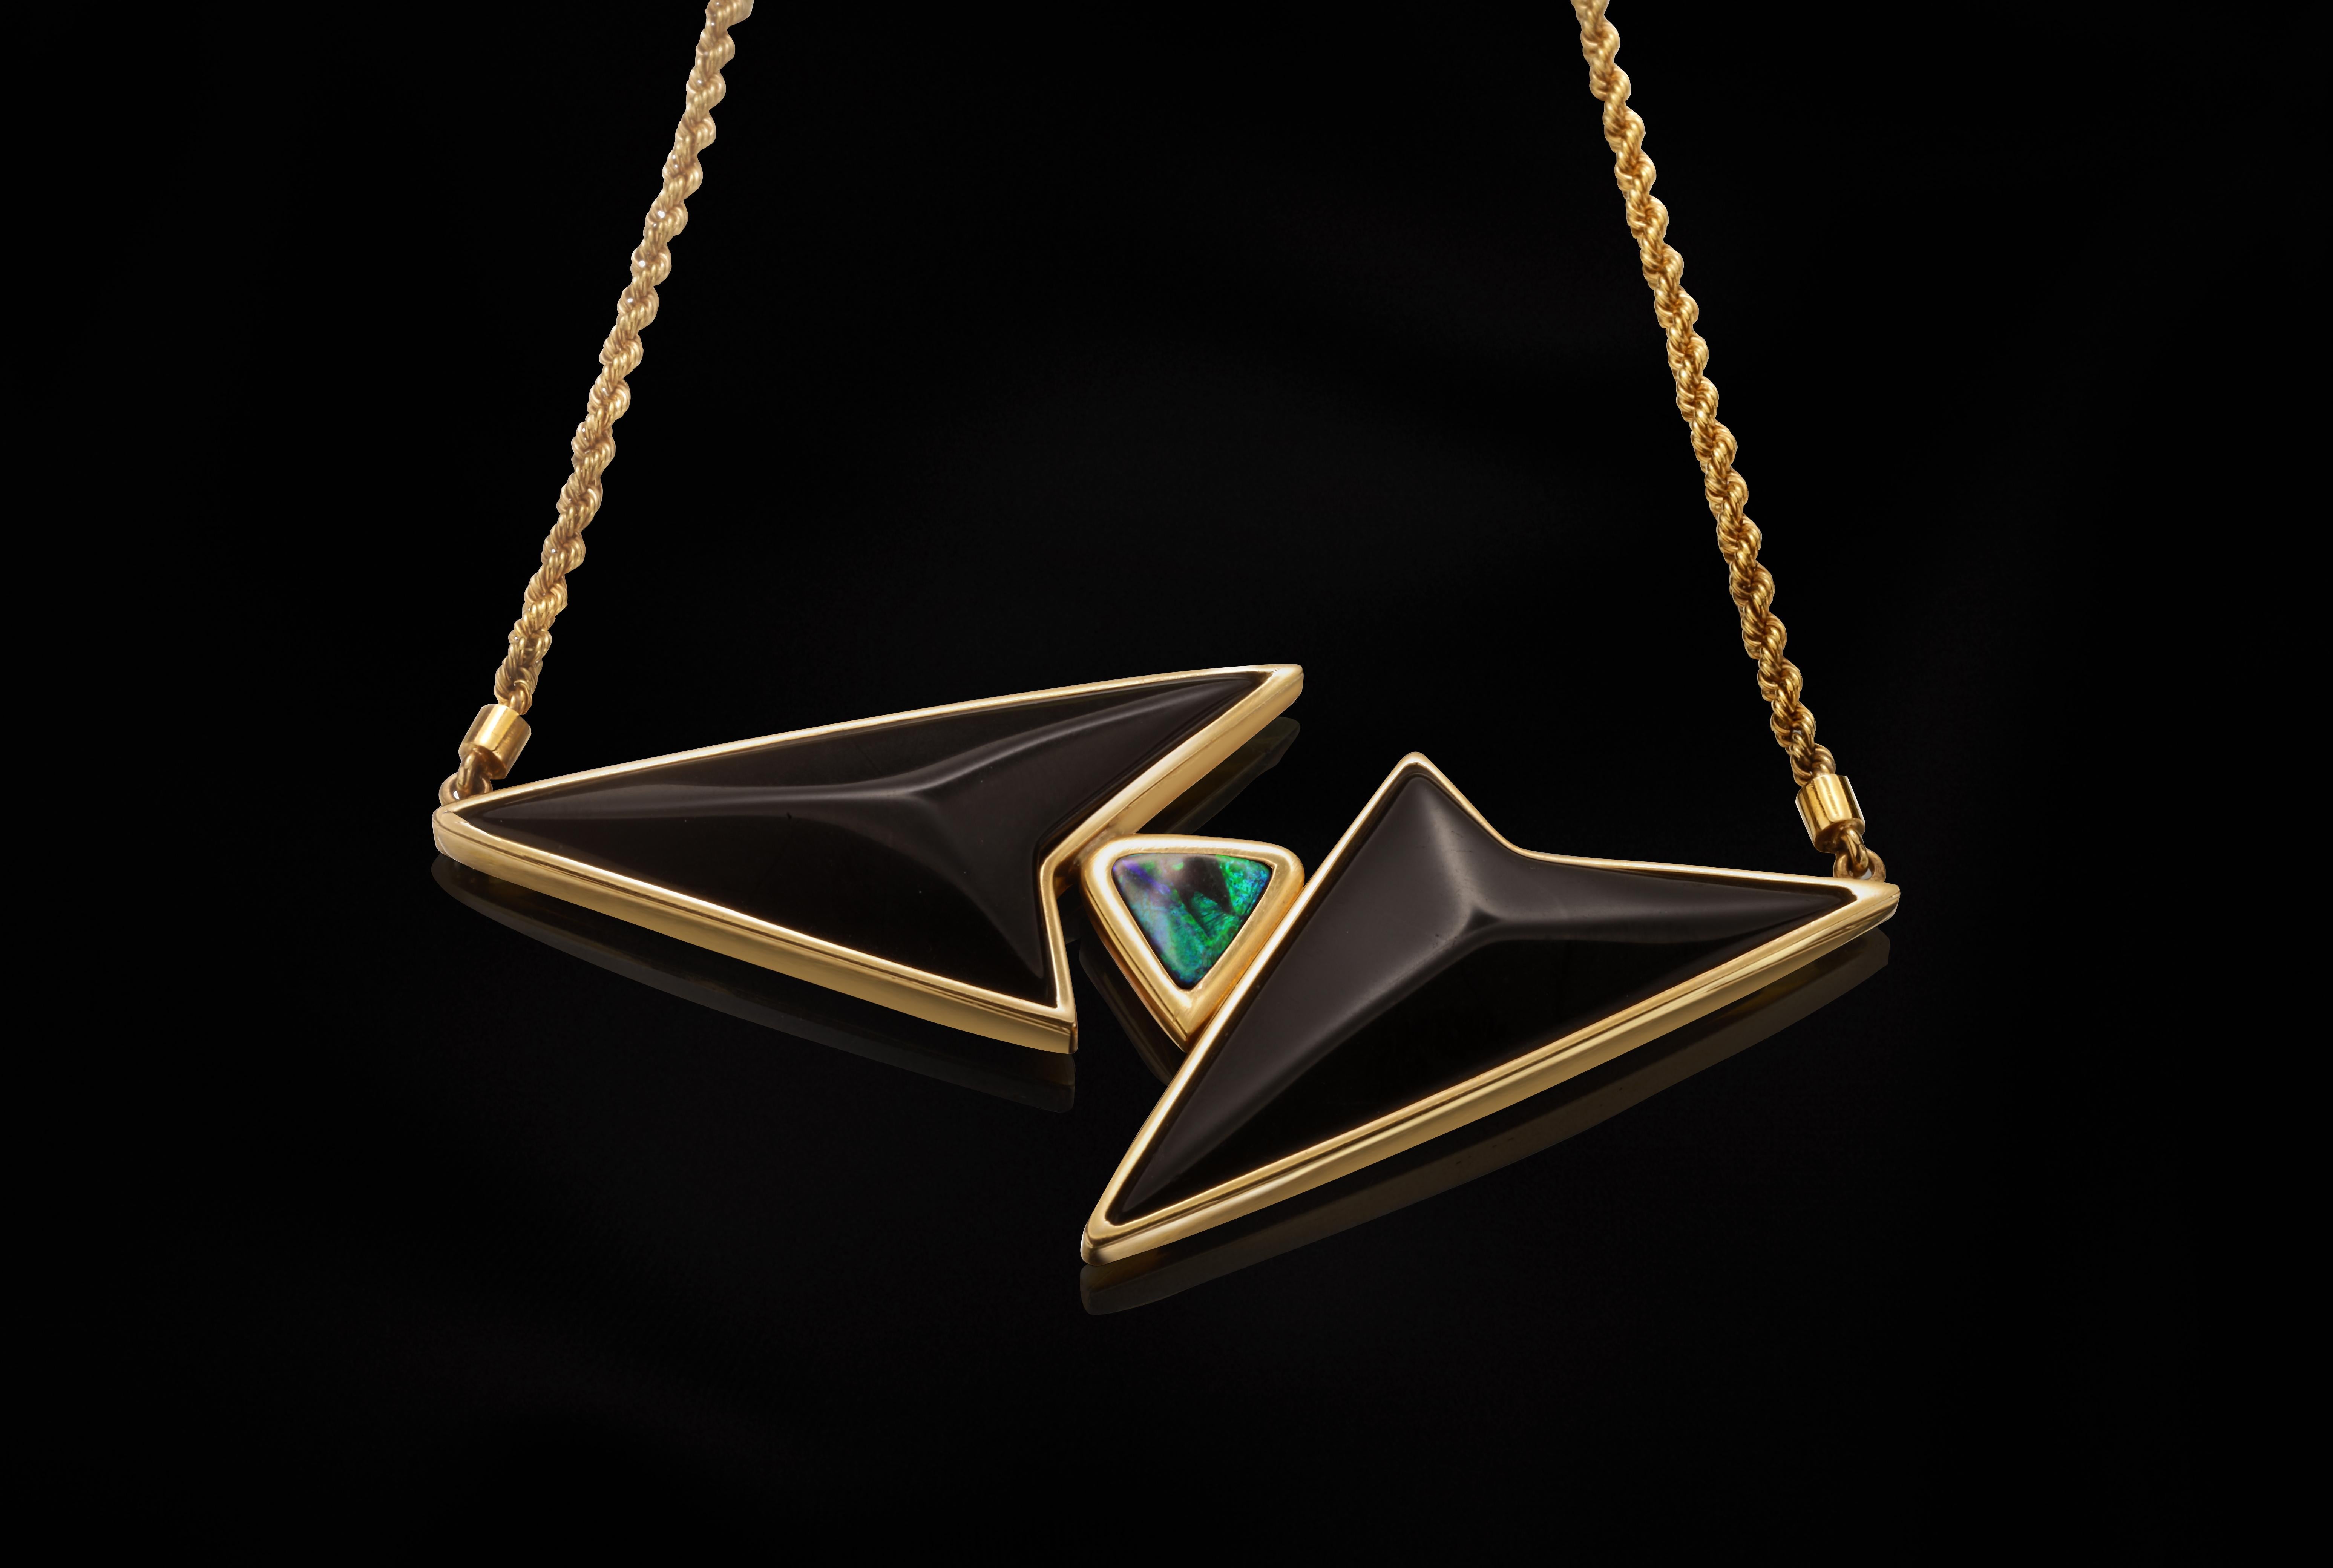 This necklace is handmade in 18 k yellow gold with two geometrically-cut pieces of onyx and a boulder Australian opal.
The main piece, with the two onyx and the opal, is held by a chain on each syde.
Gold clasp on the back part of the neck.
It is a